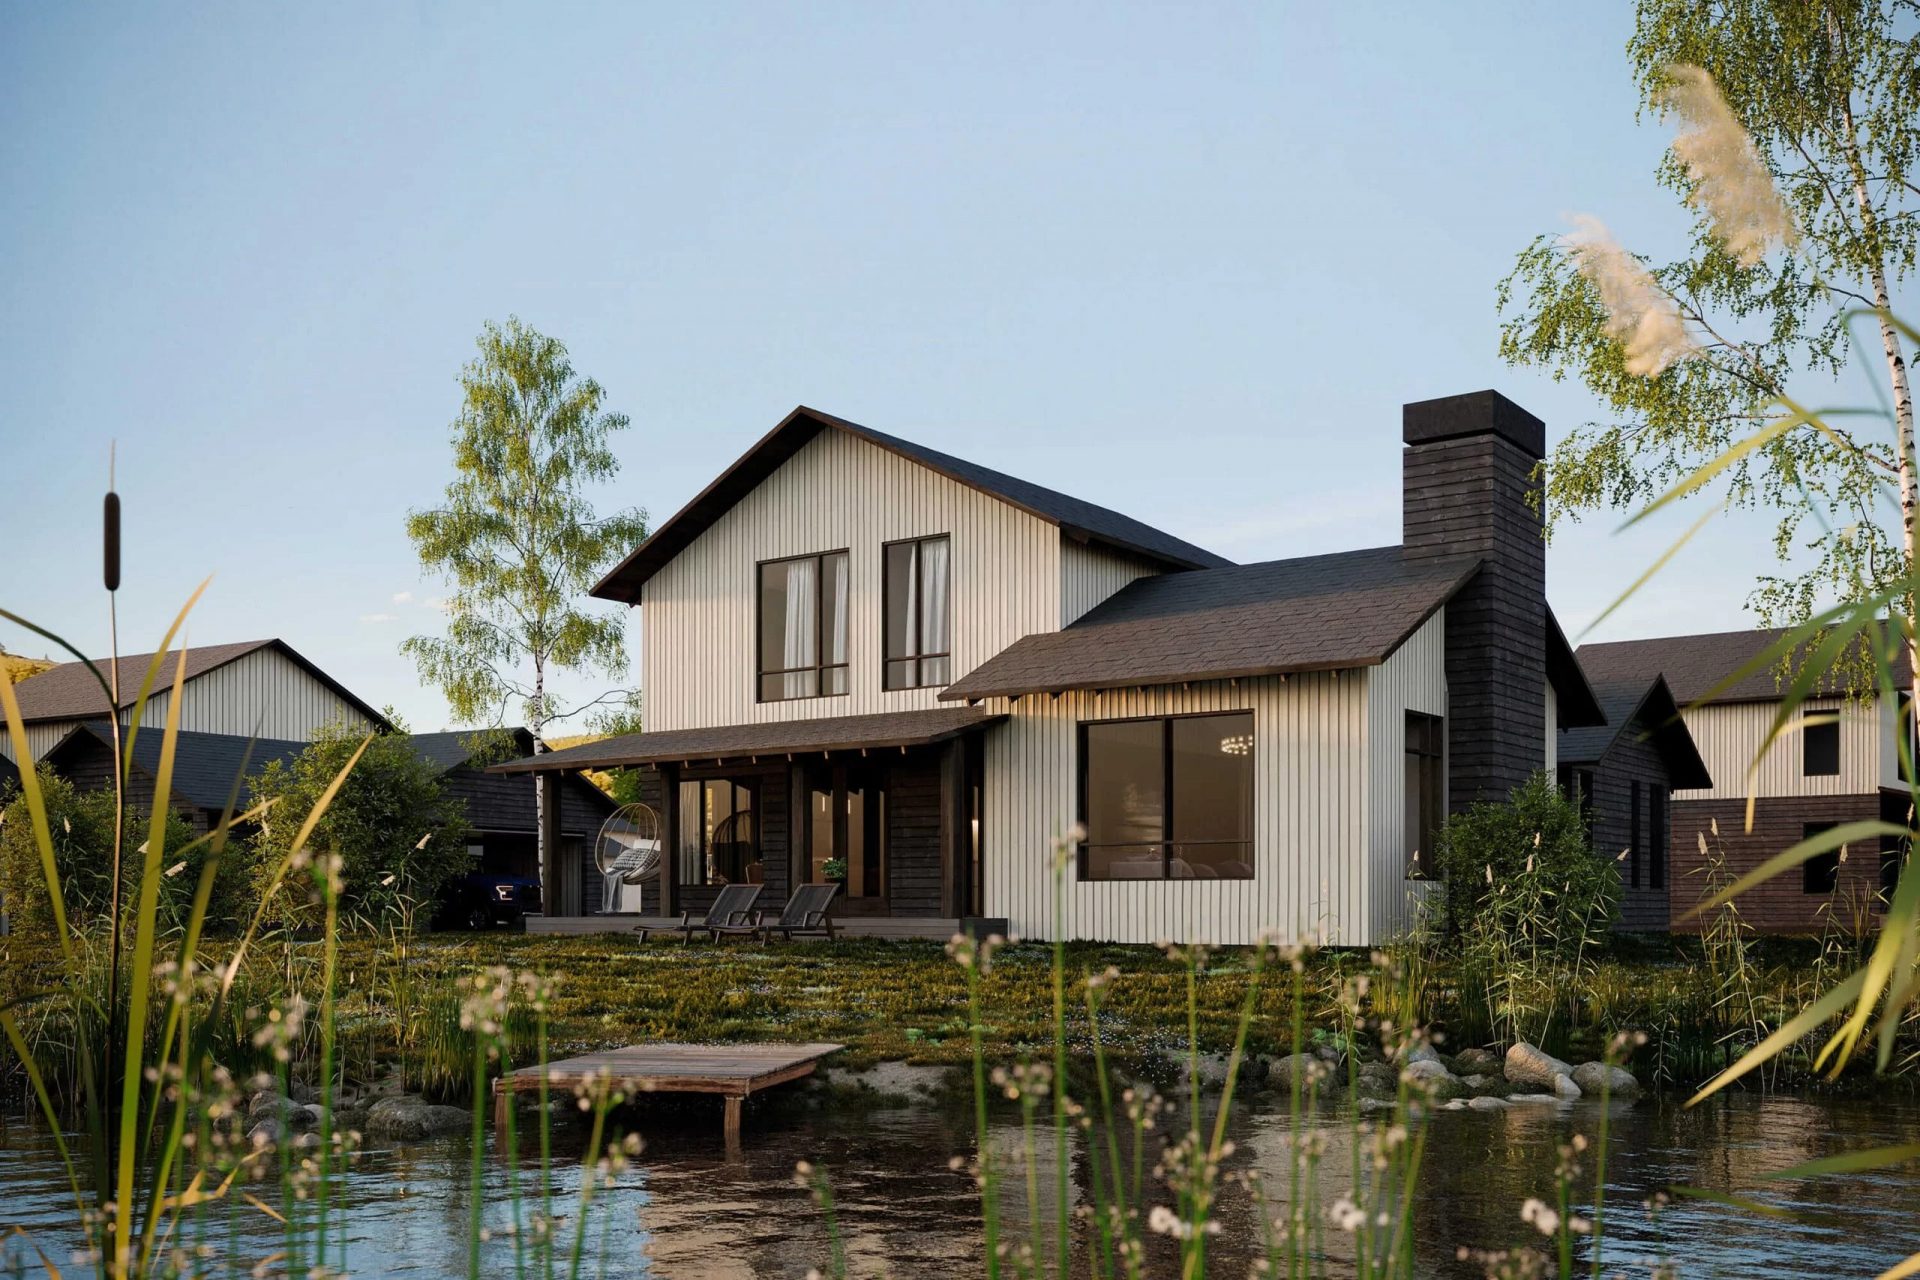 3D Image of a Waterside House